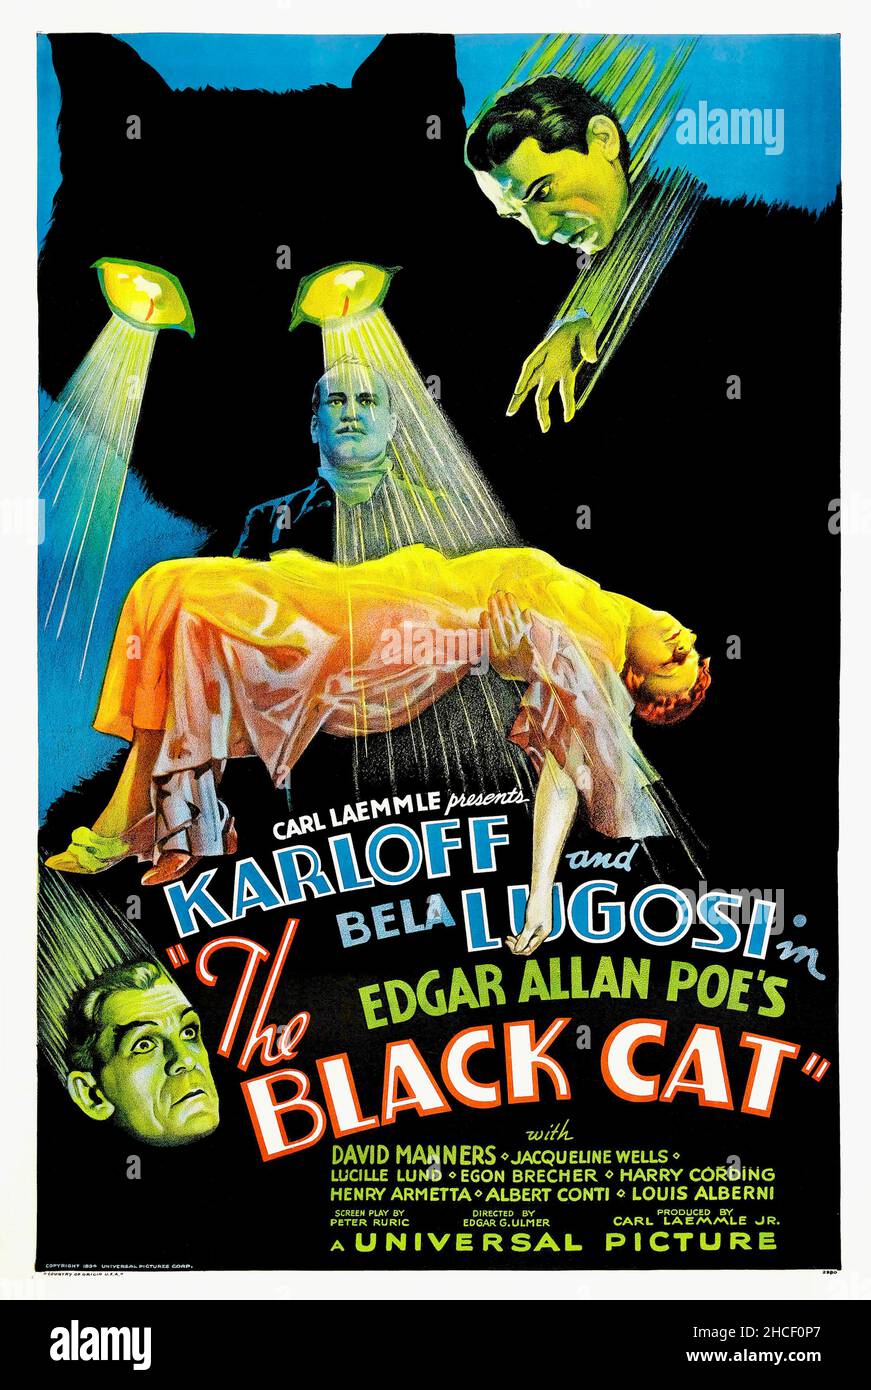 The Black Cat Poster  - Expensive horror film poster starring Boris Karloff and Bela  Lugosi which fetched $286,800 in 2007. Stock Photo